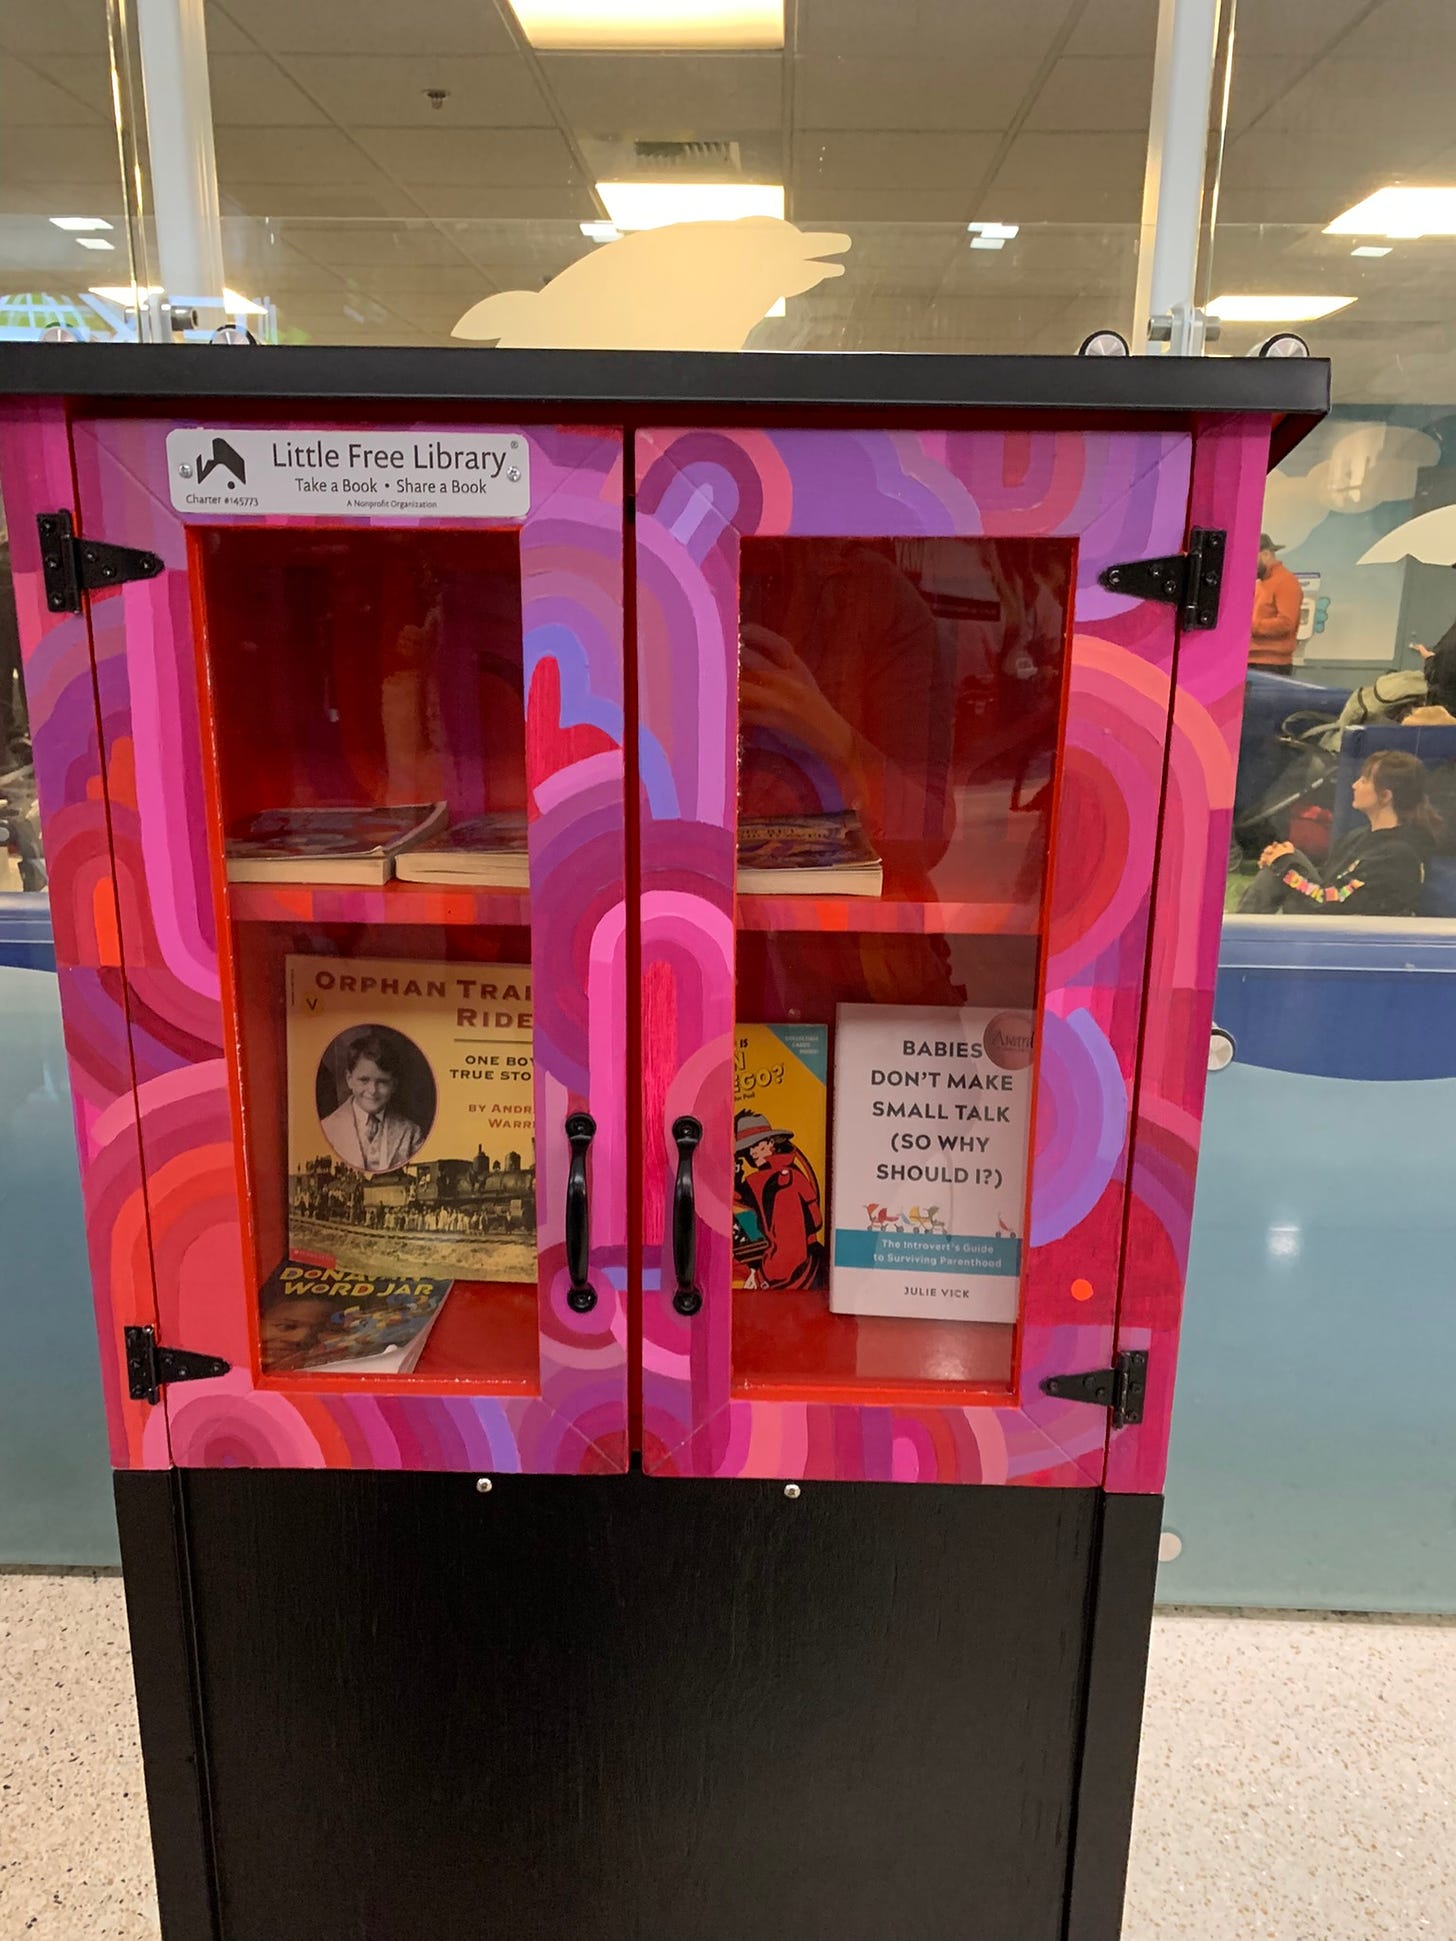 A photo of my book in an artistically decorated little free library at the Seattle Airport